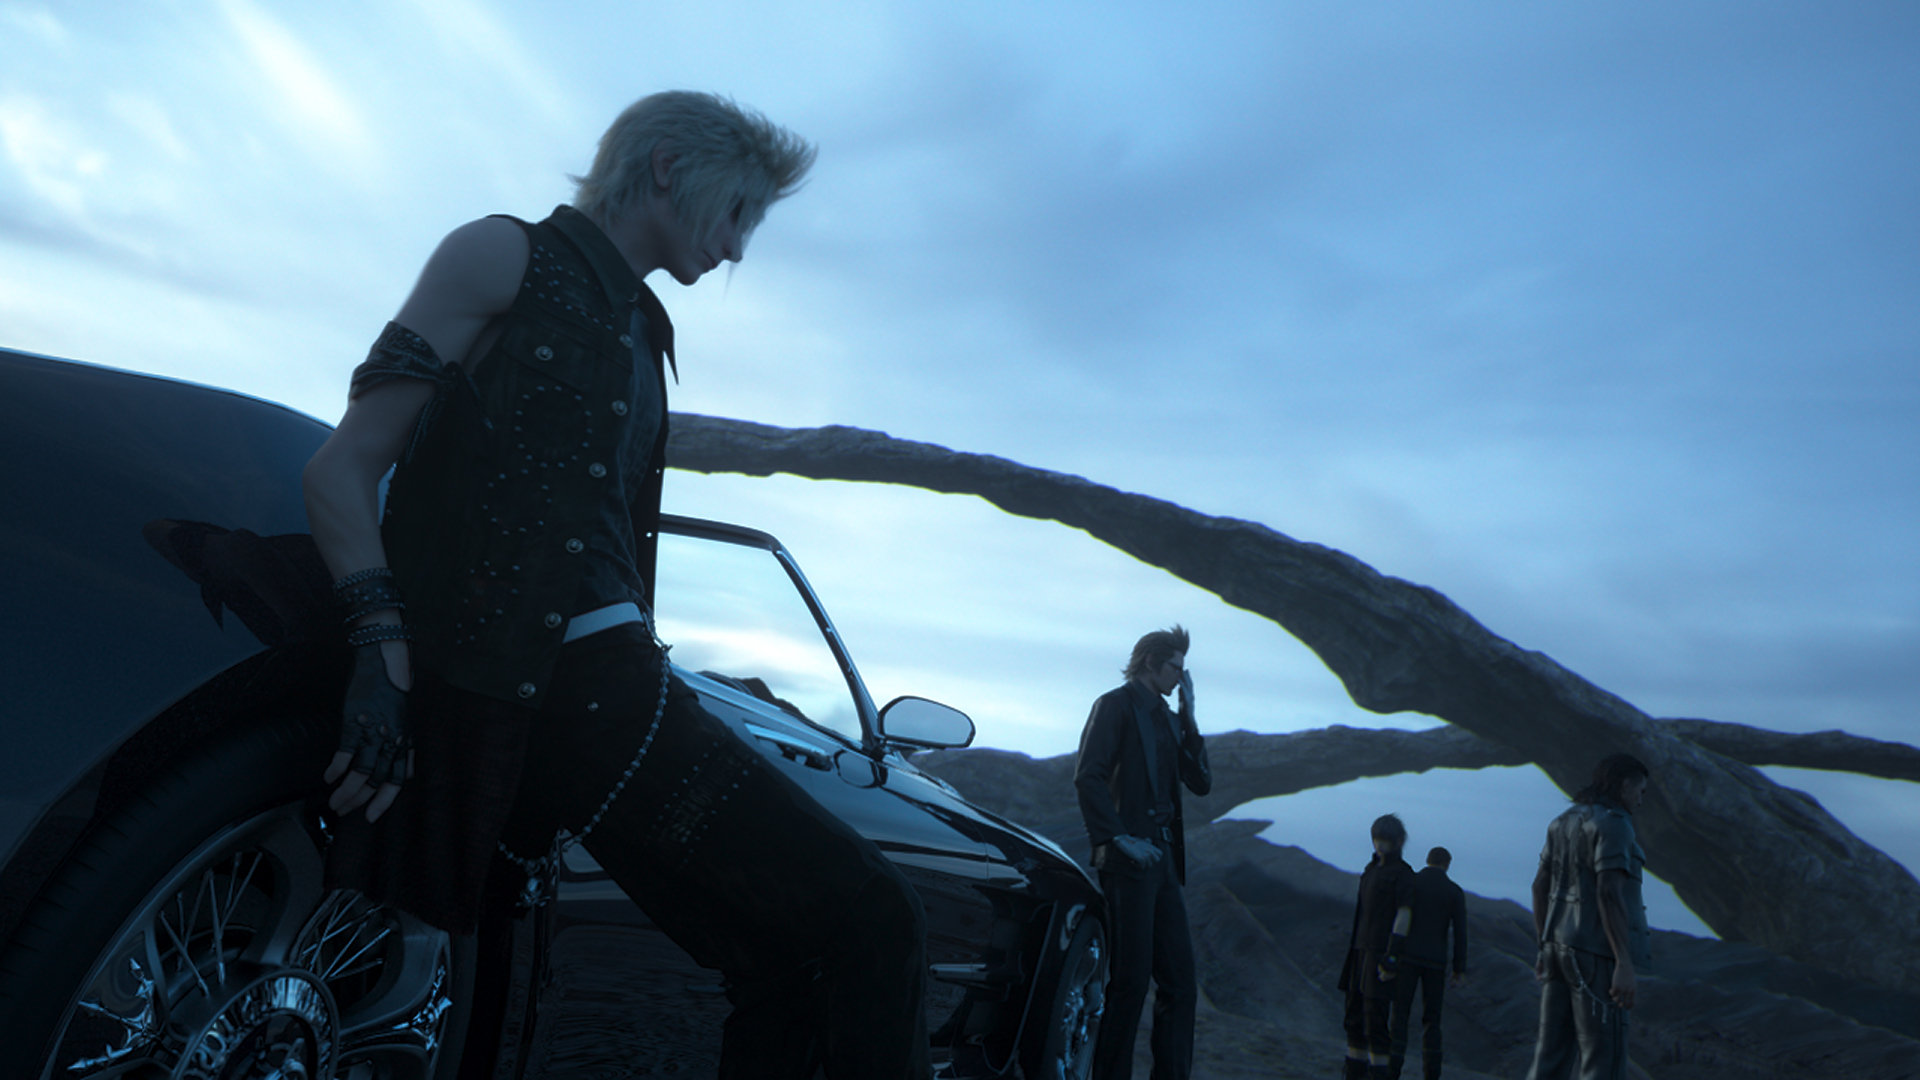 More “Final Fantasy XV” Questions Answered - Character Ages, Game Mechanics, and More